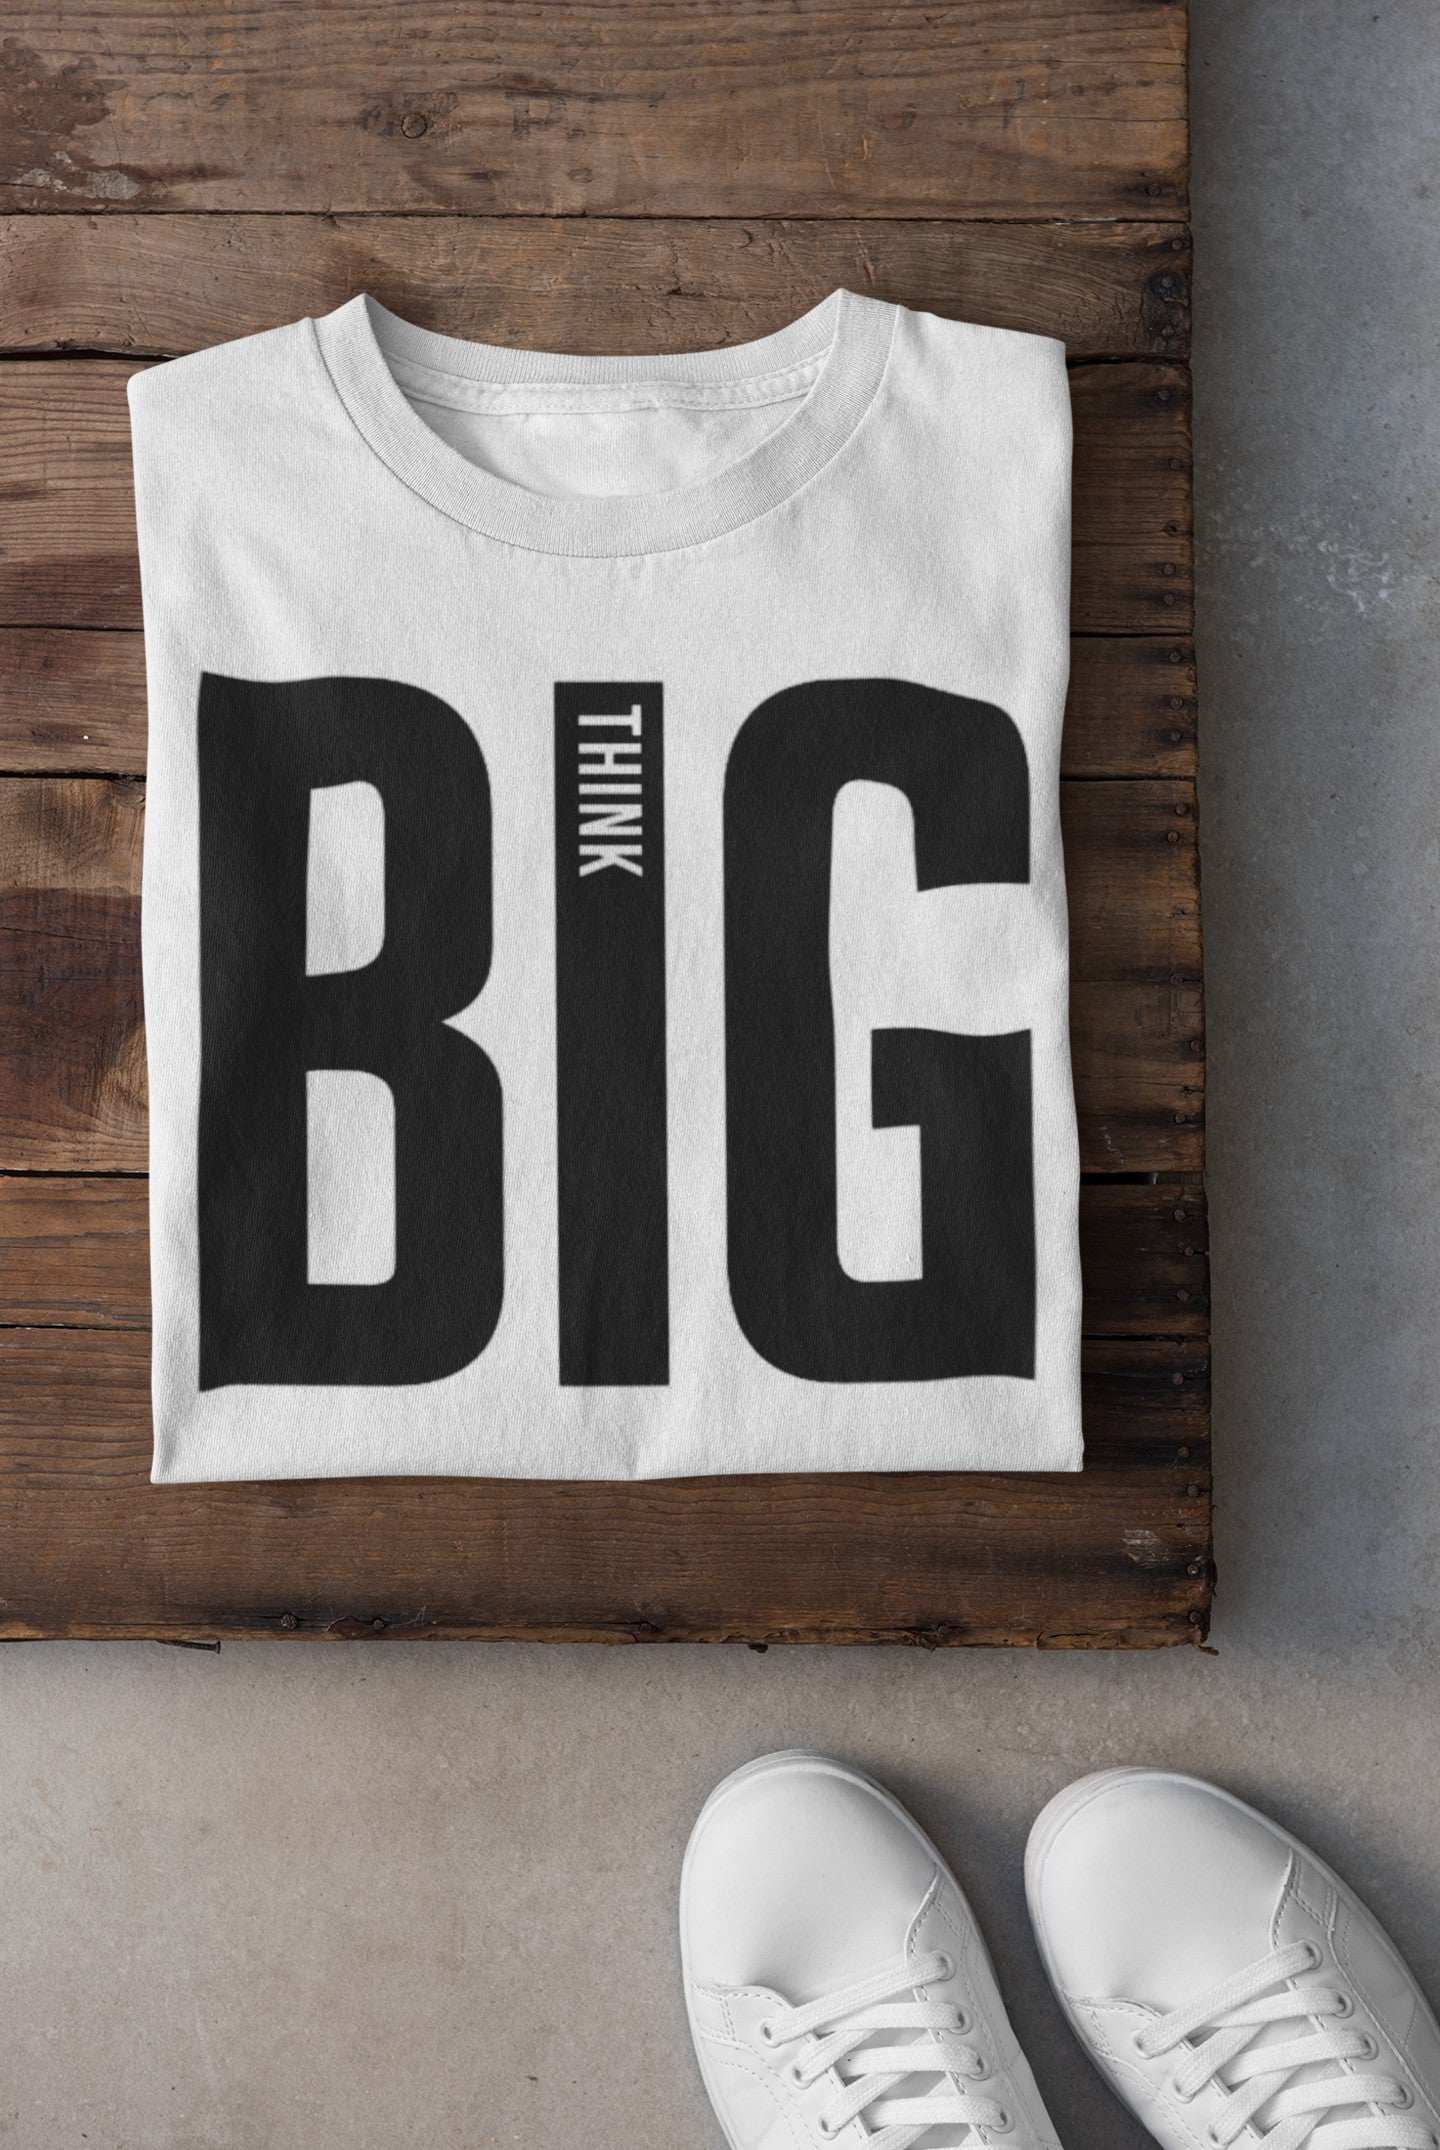 Gym T Shirt - Think Big with premium cotton Lycra. The Sports T Shirt by Strong Soul